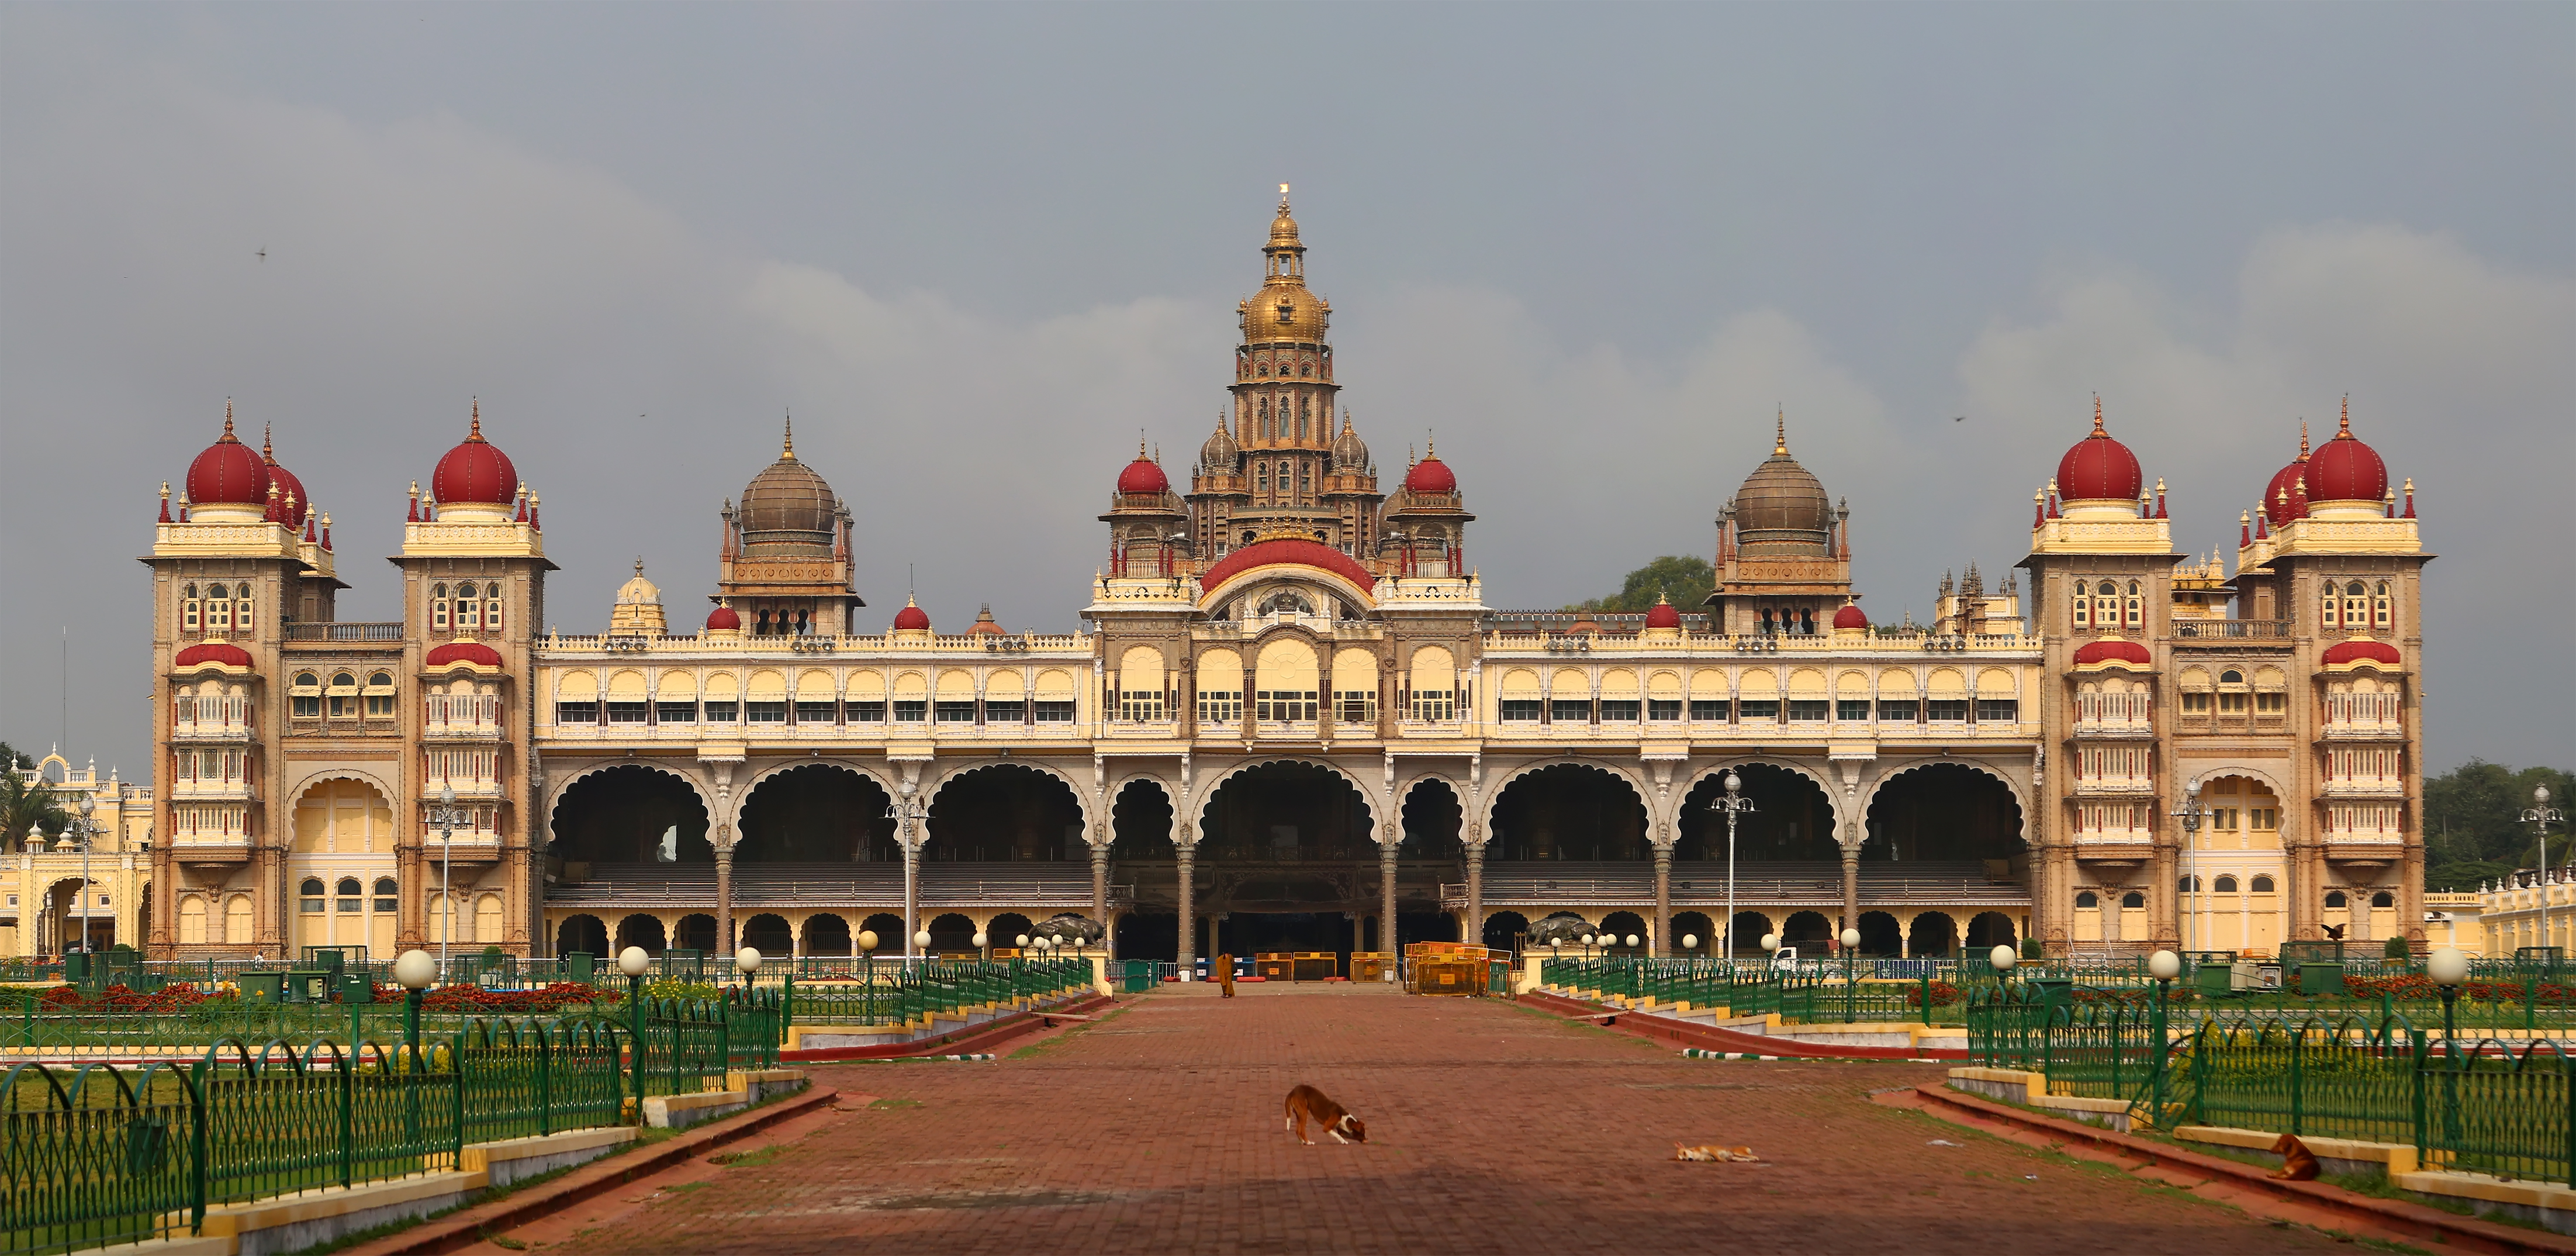 Image result for mysore palace images